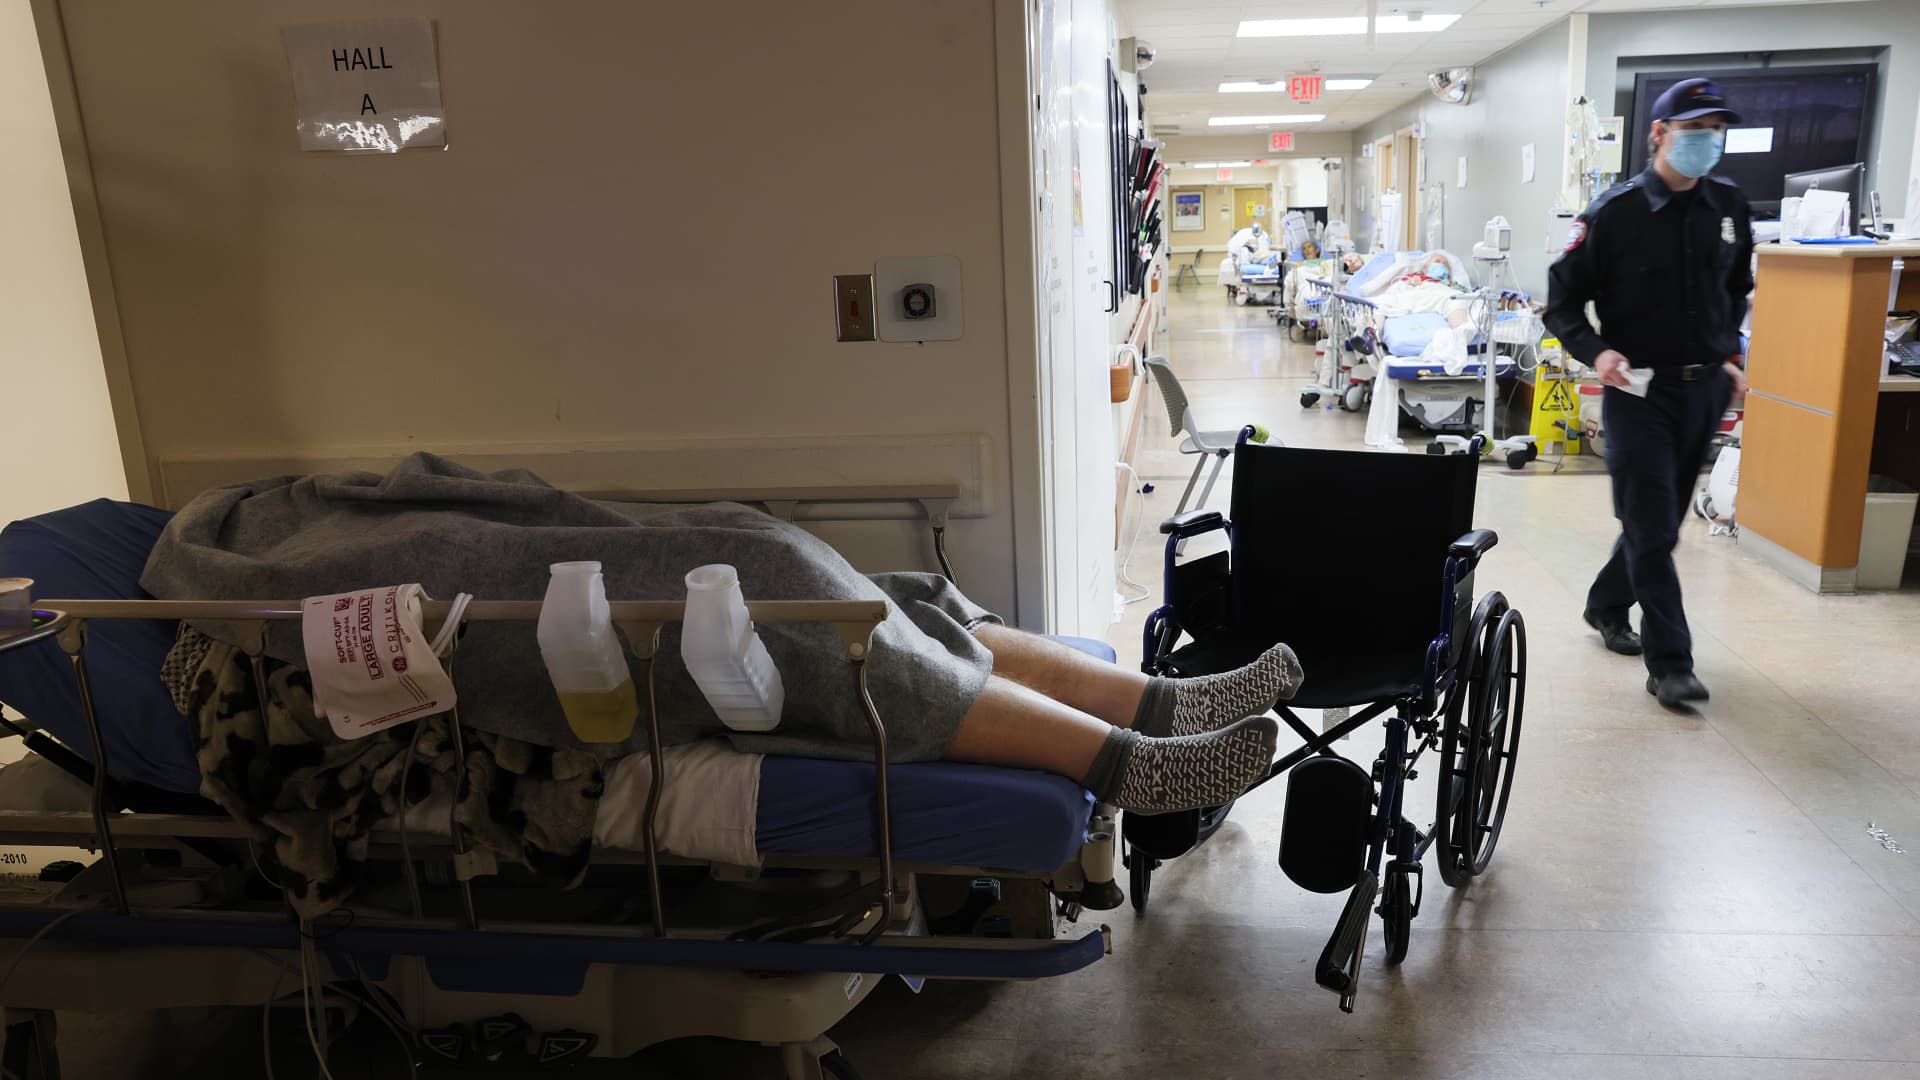 A patient lies on a stretcher in a hallway near other patients in the overloaded Emergency Room at Providence St. Mary Medical Center amid a surge in COVID-19 patients in Southern California on January 5, 2021 in Apple Valley, California.